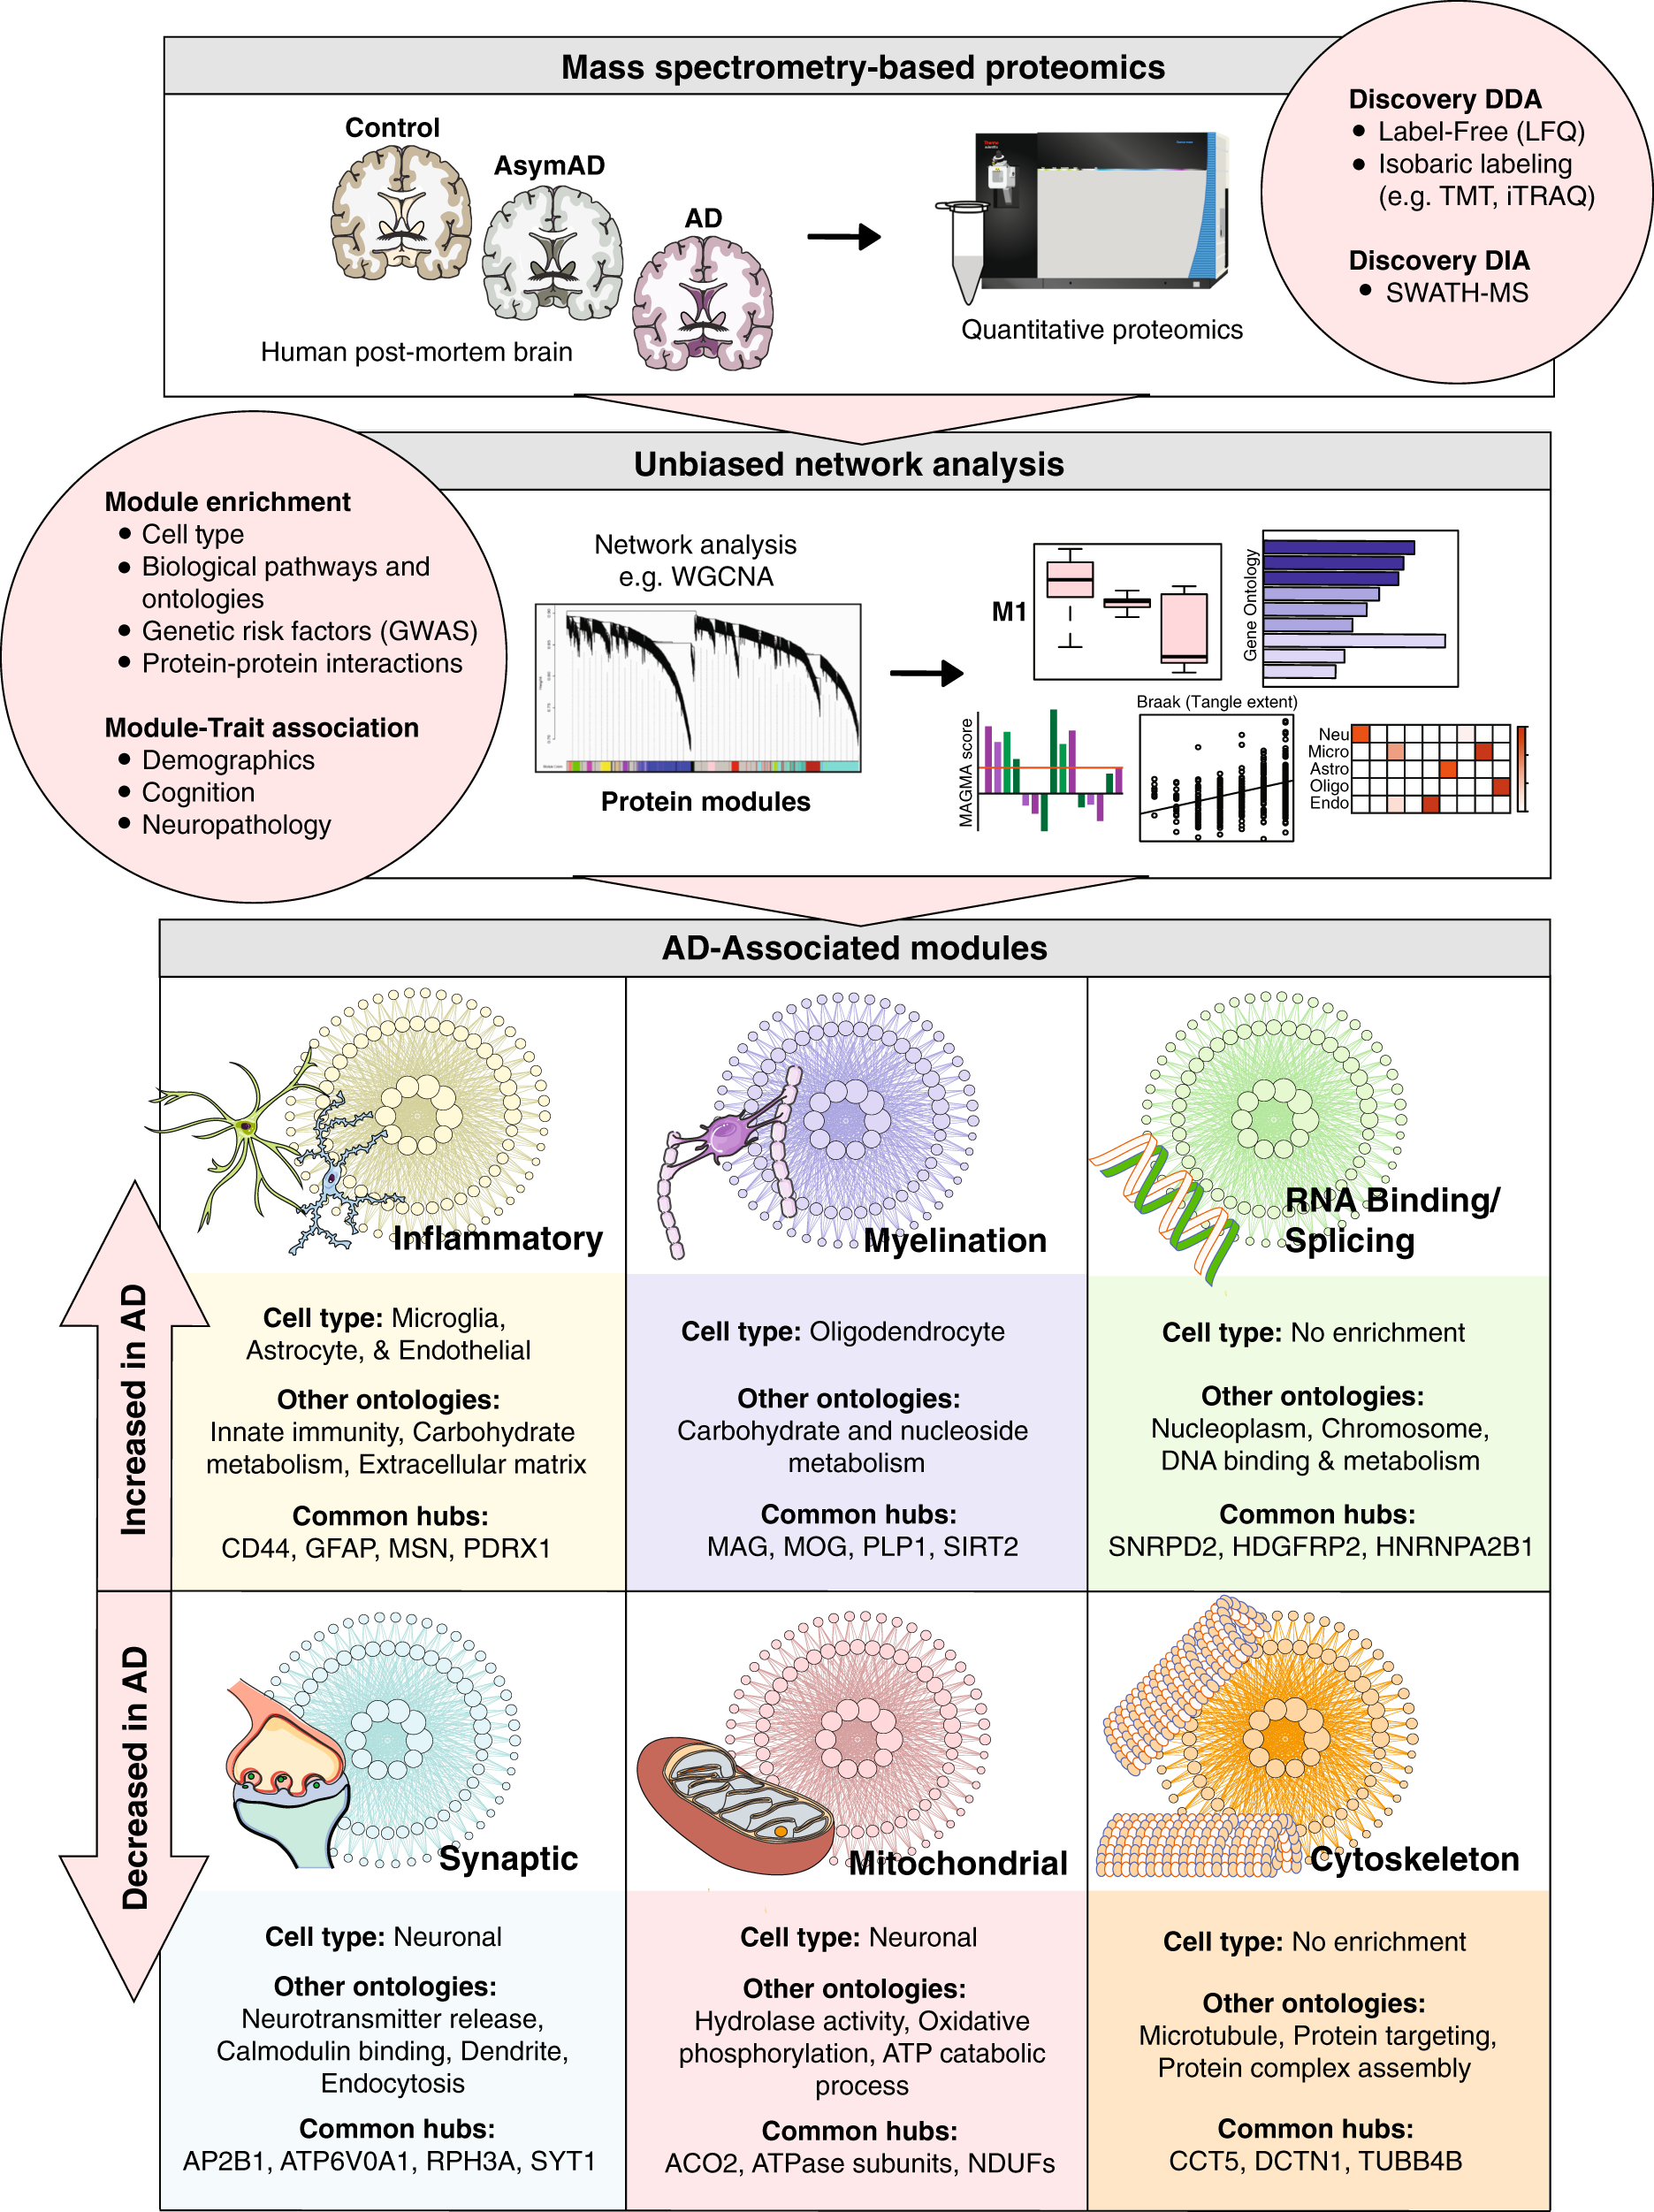 Systems-based proteomics to resolve the biology of Alzheimer's disease  beyond amyloid and tau | Neuropsychopharmacology